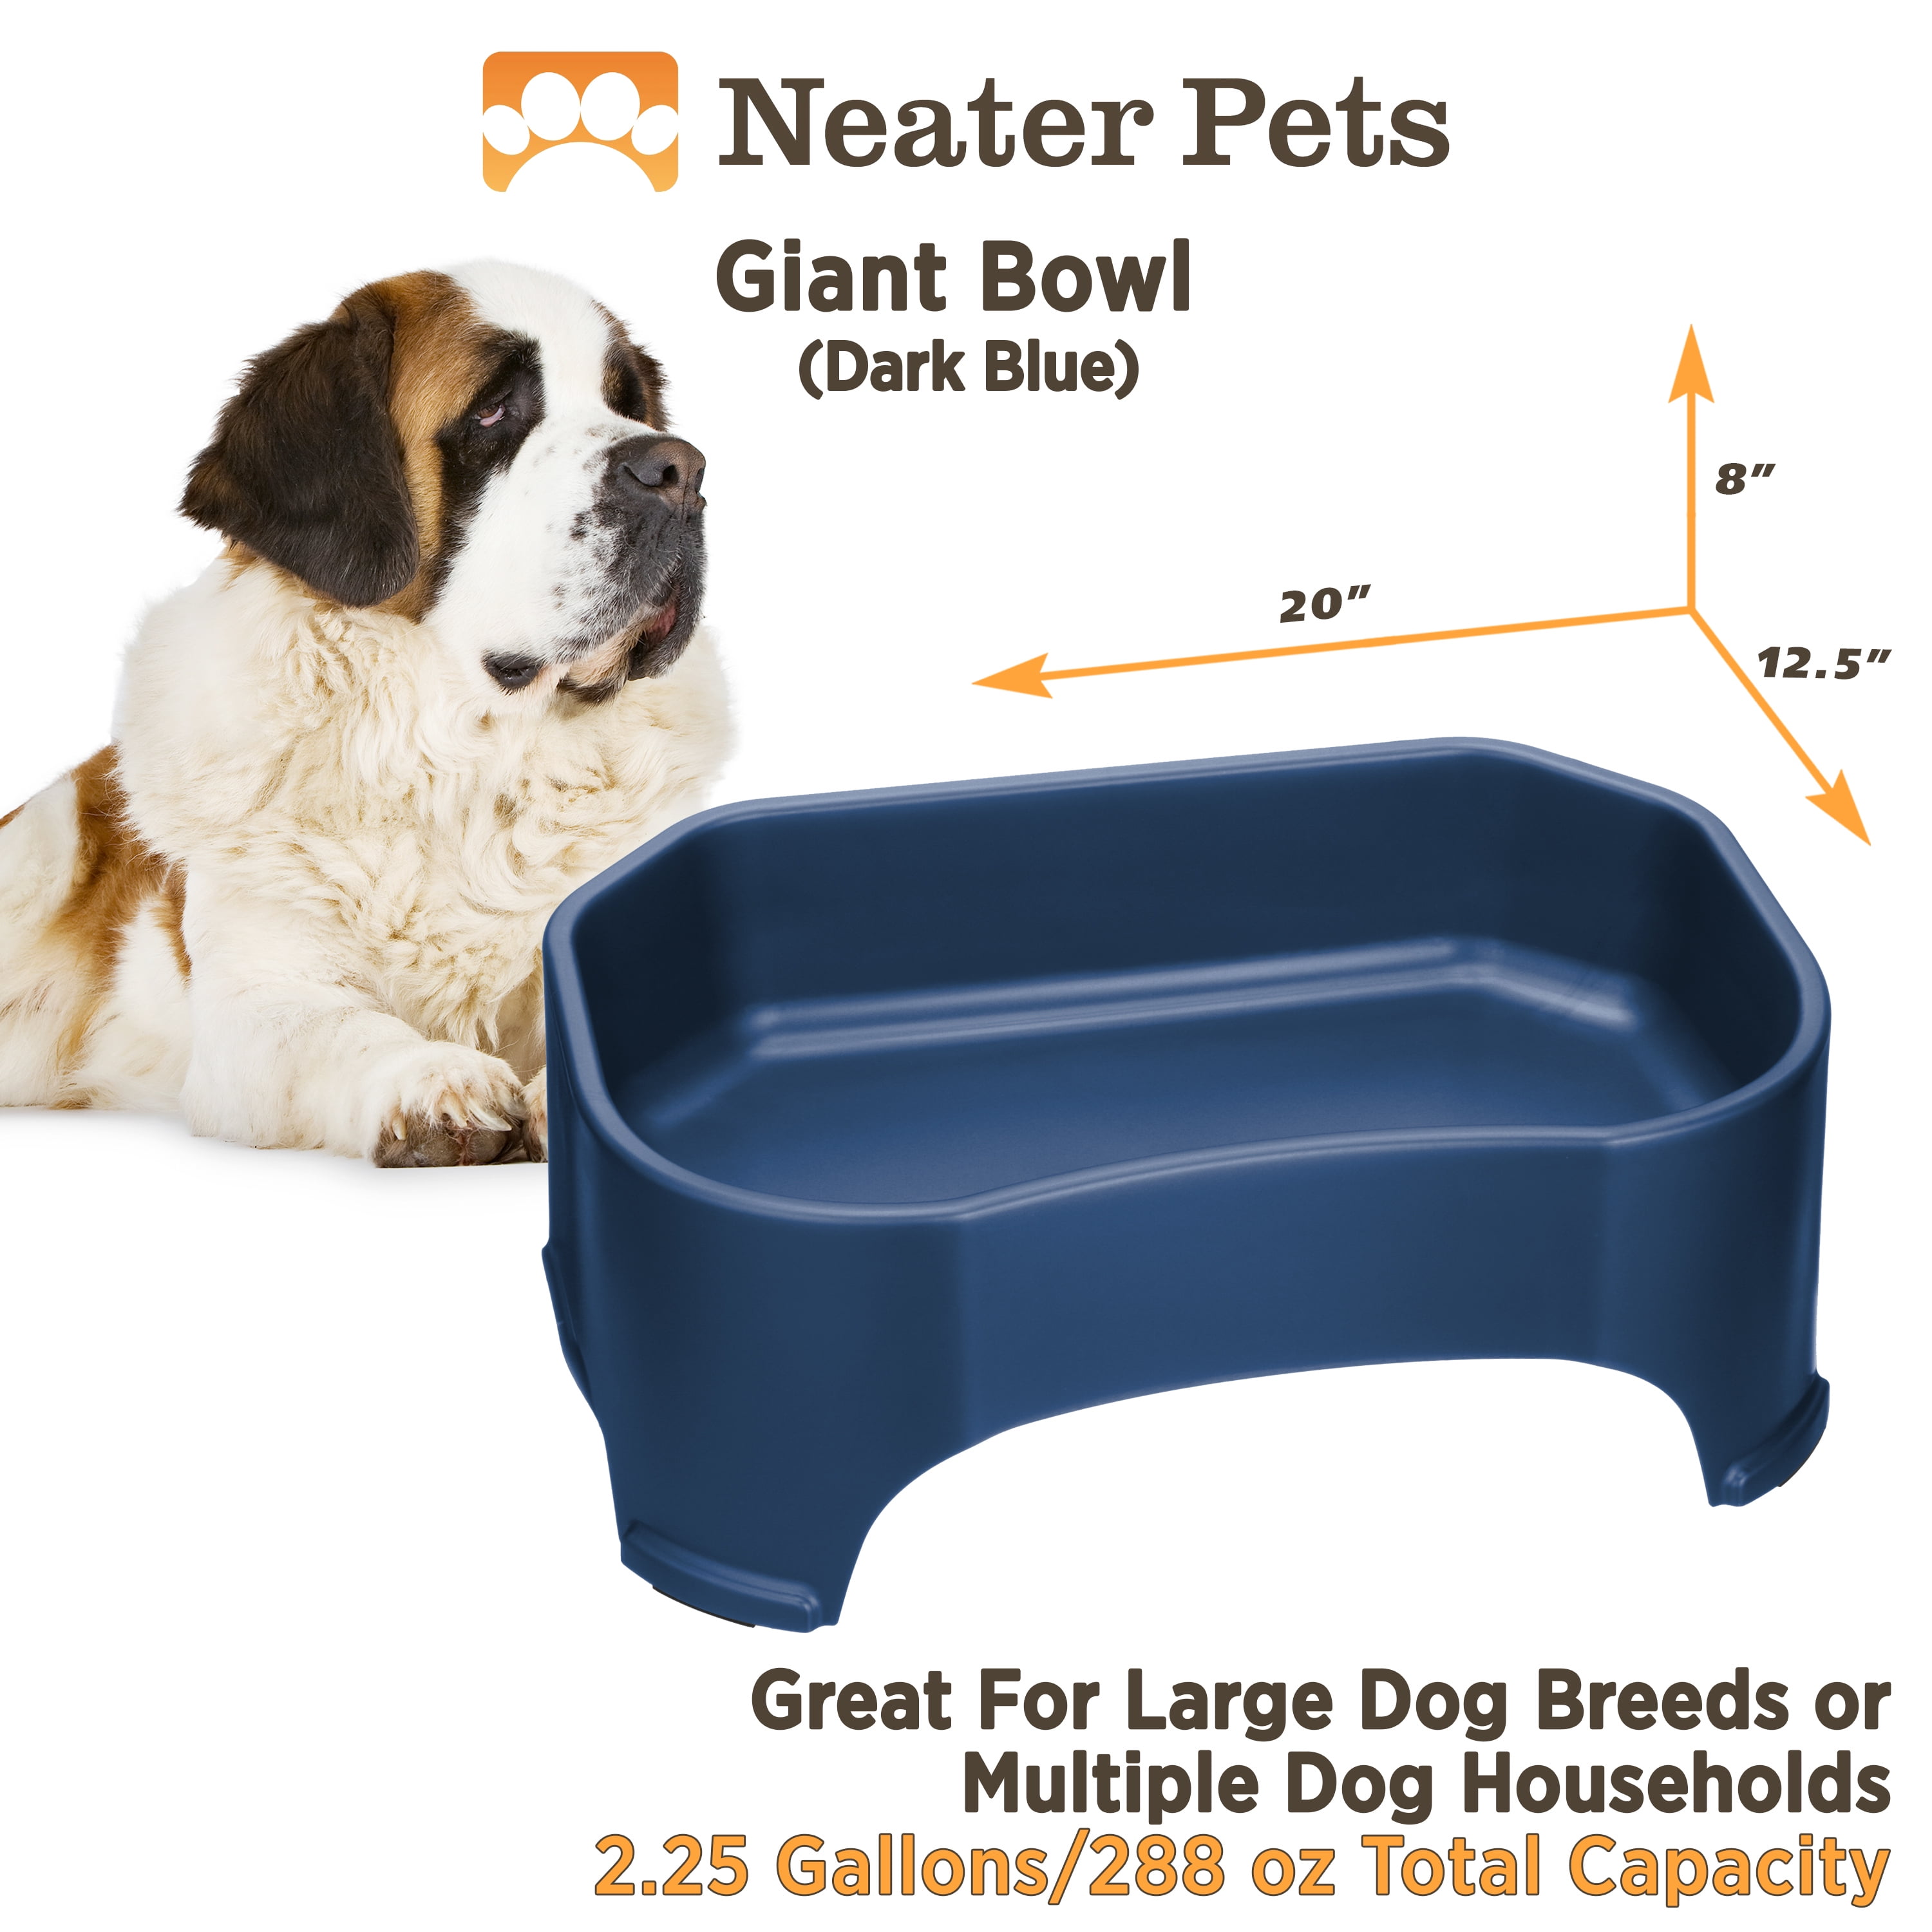 Neater Pets Giant Bowl for Large Dogs - Plastic Trough Style Food